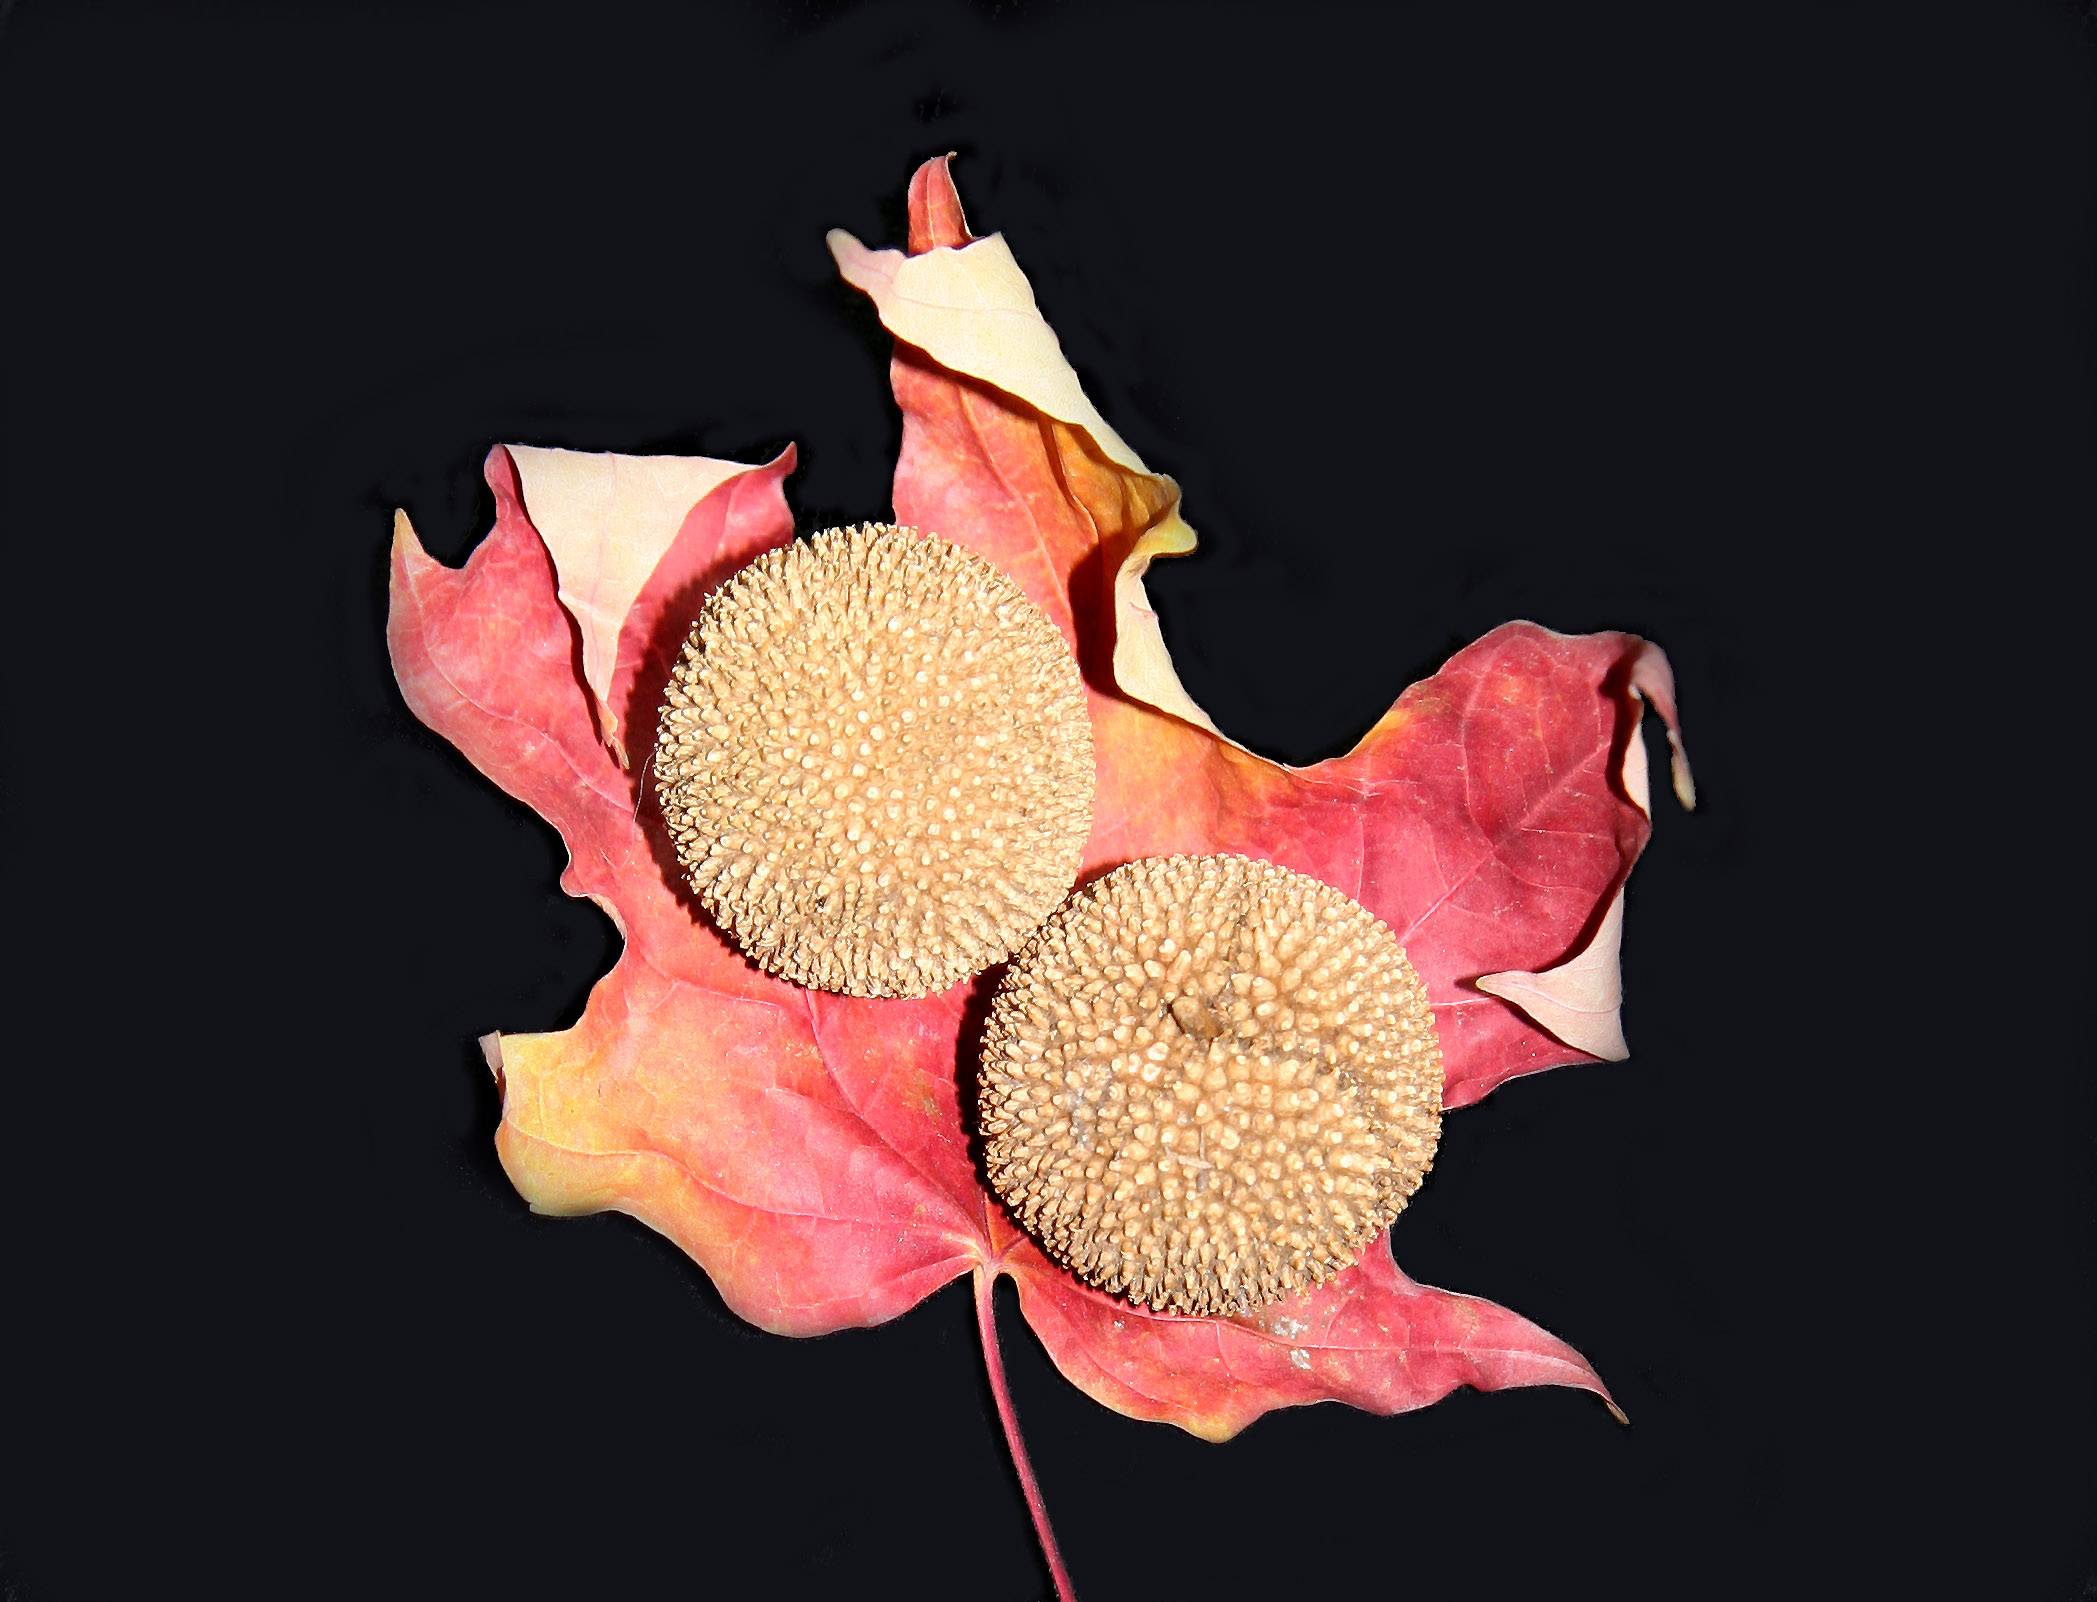 Sycamore Seed Balls in a Maple Leaf Glove